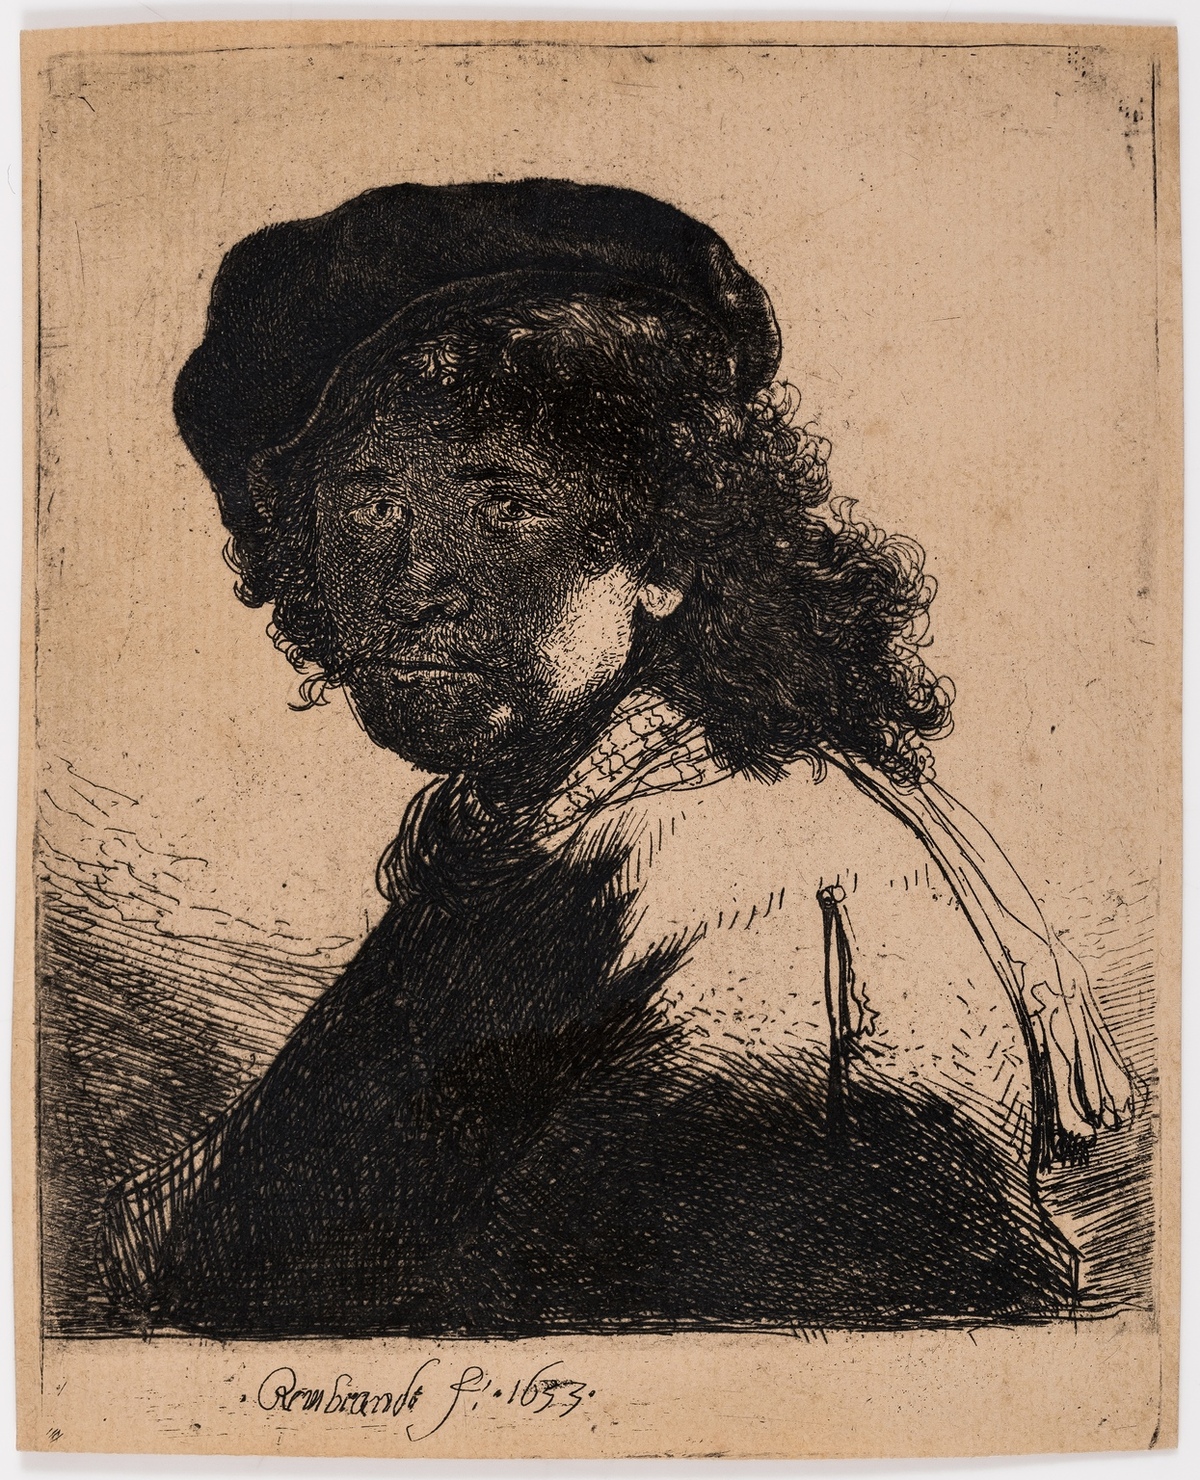 Rembrandt van Rijn (1606-1669) Self-Portrait in a Cap and Scarf with the Face Dark